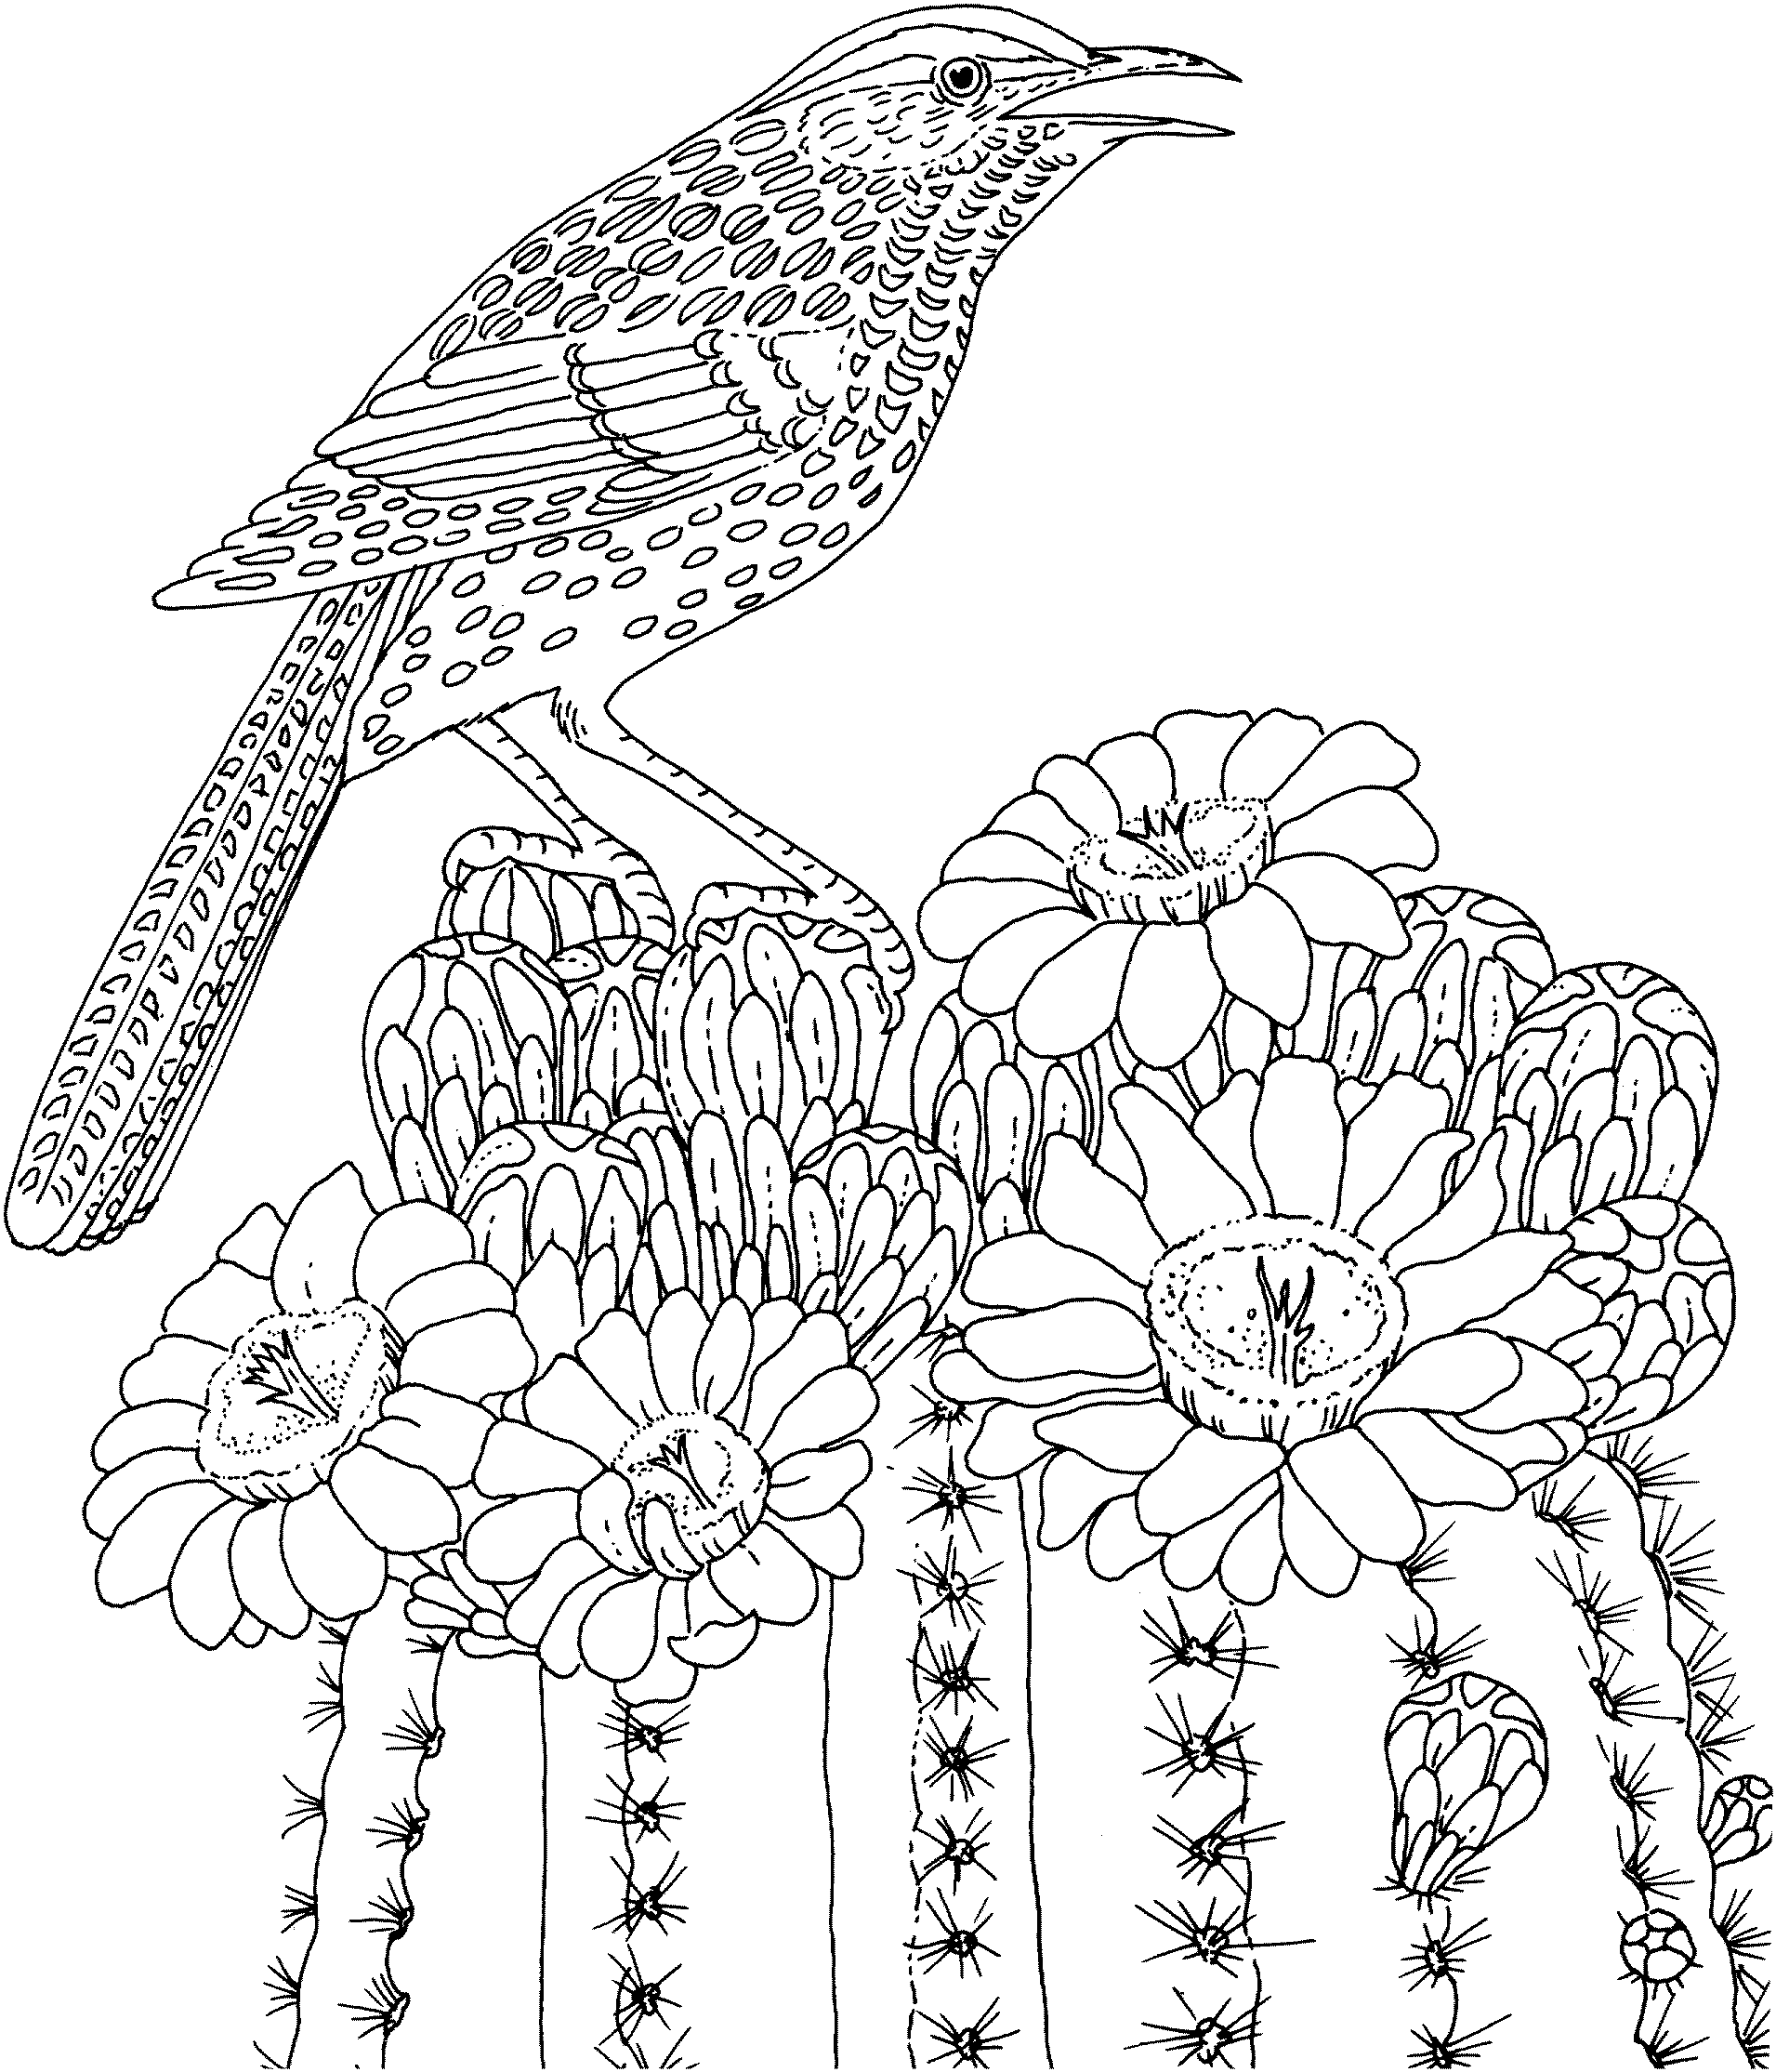 challenging coloring pages free difficult coloring pages for adults challenging coloring pages 